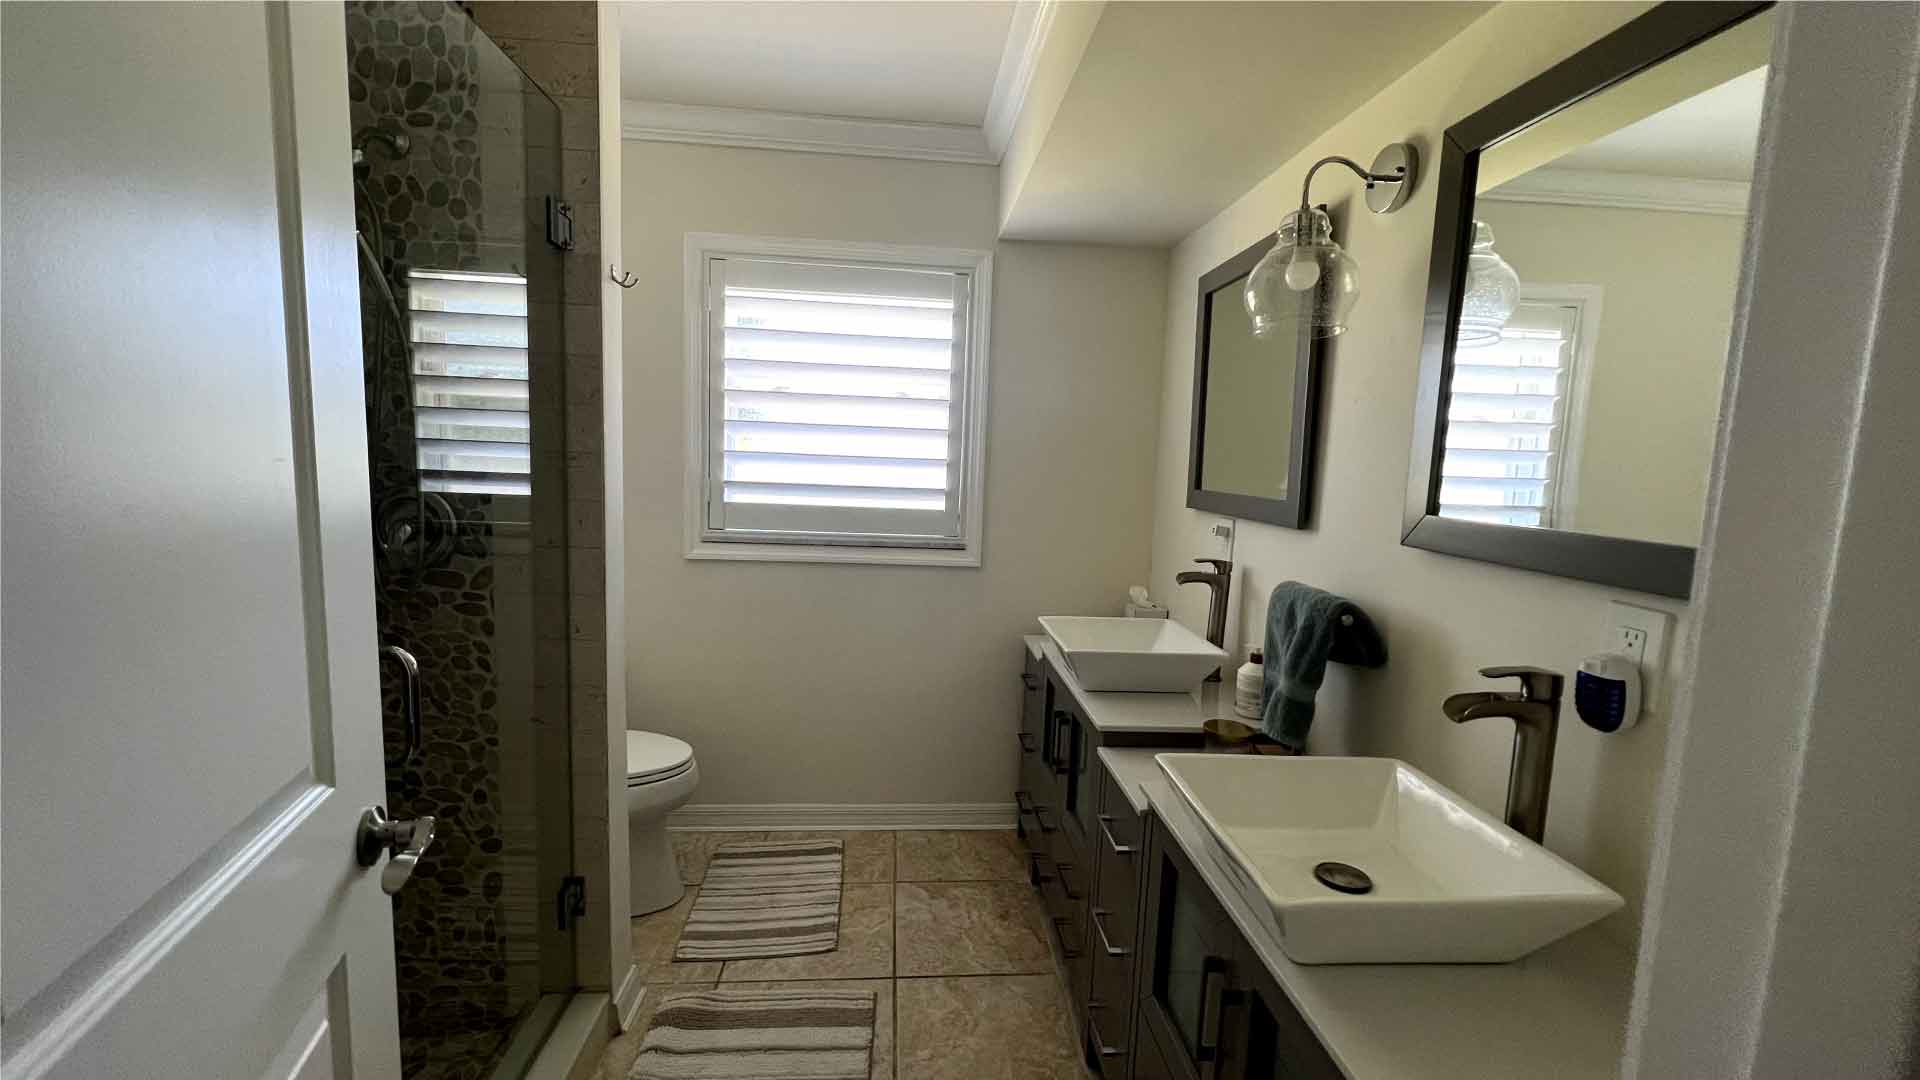 Bathroom - Deep cleaning in Cape Coral by Goldmillio - Apr 2